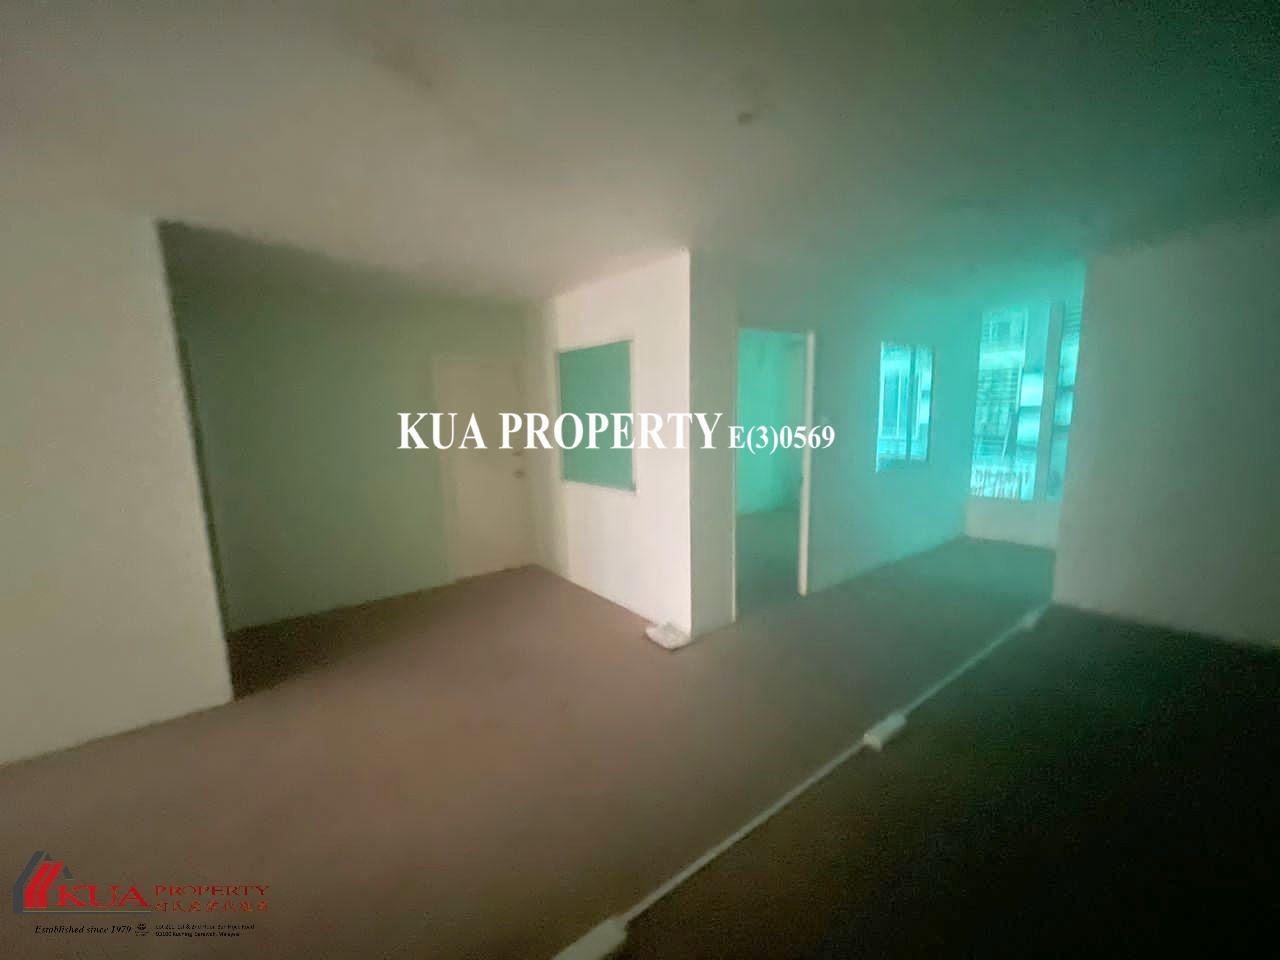 First Floor Intermediate Shoplot/Office FOR RENT! 📍Located at Jalan Song